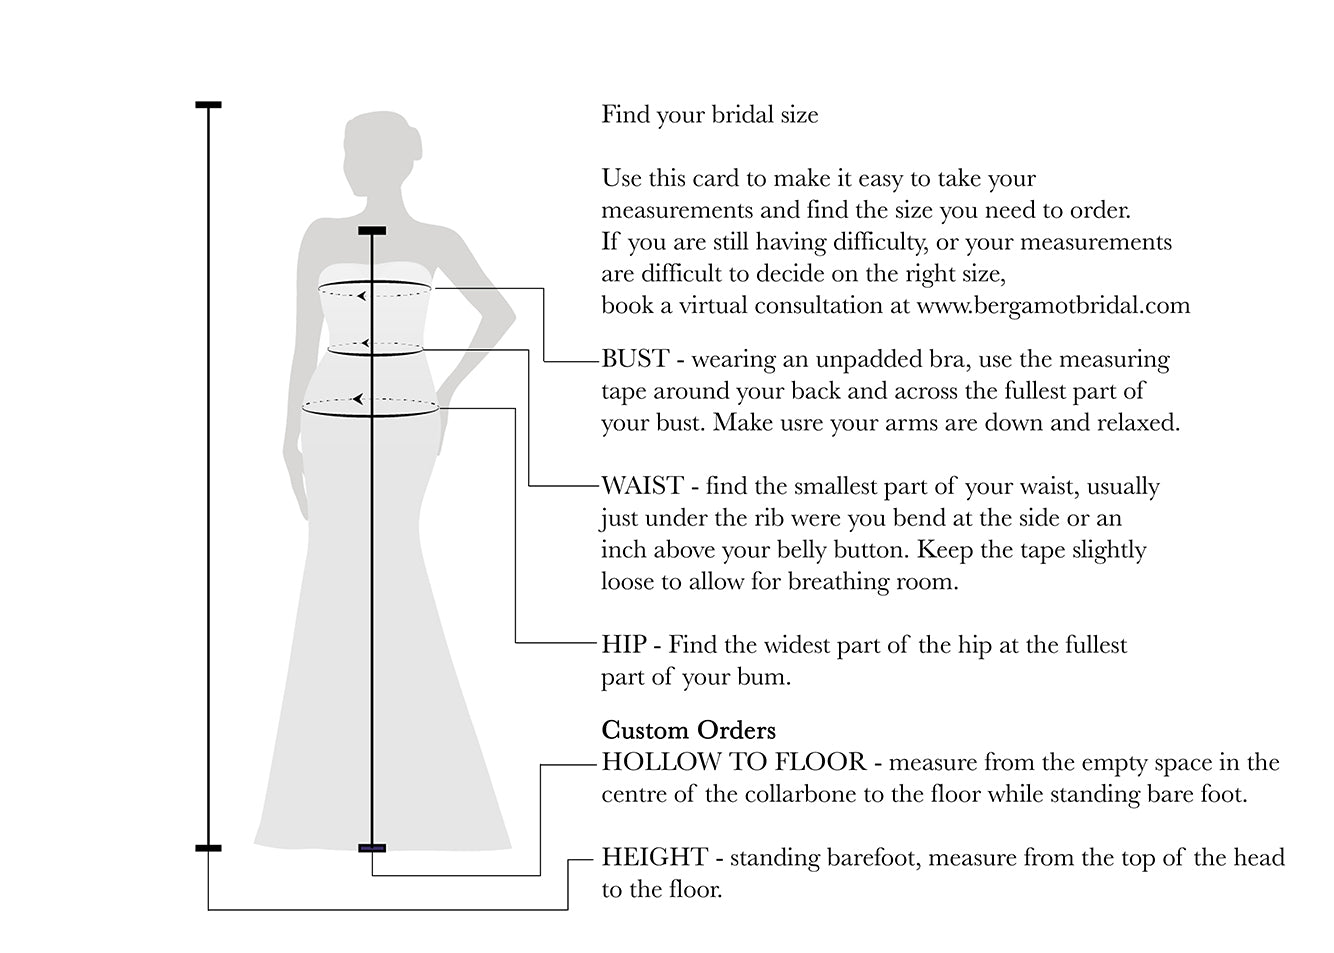 A diagram showing the measurements of the Bergamot Bridal Strapless Princess A-line Bridal Gown with Tulle Skirt and Floral Beaded Bodice.